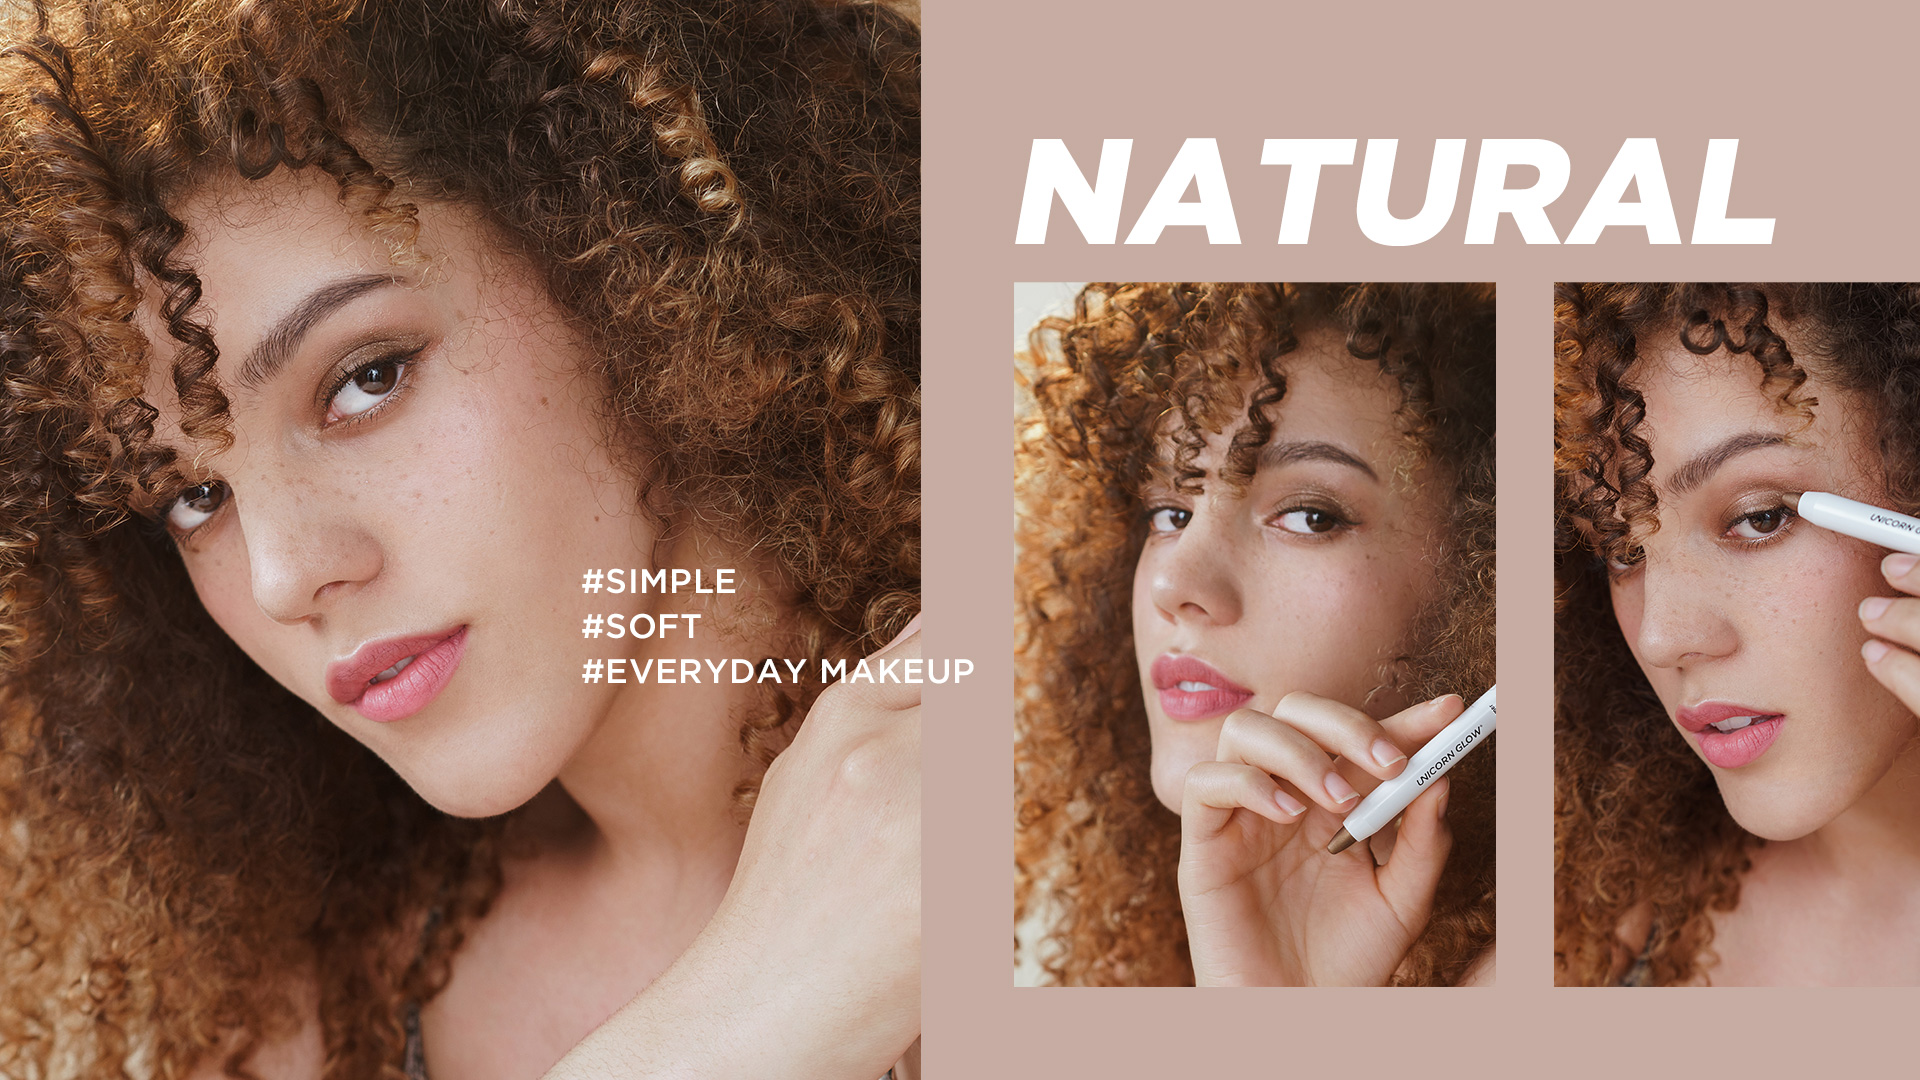 #Natural # Simple # Soft # Everyday Makeup